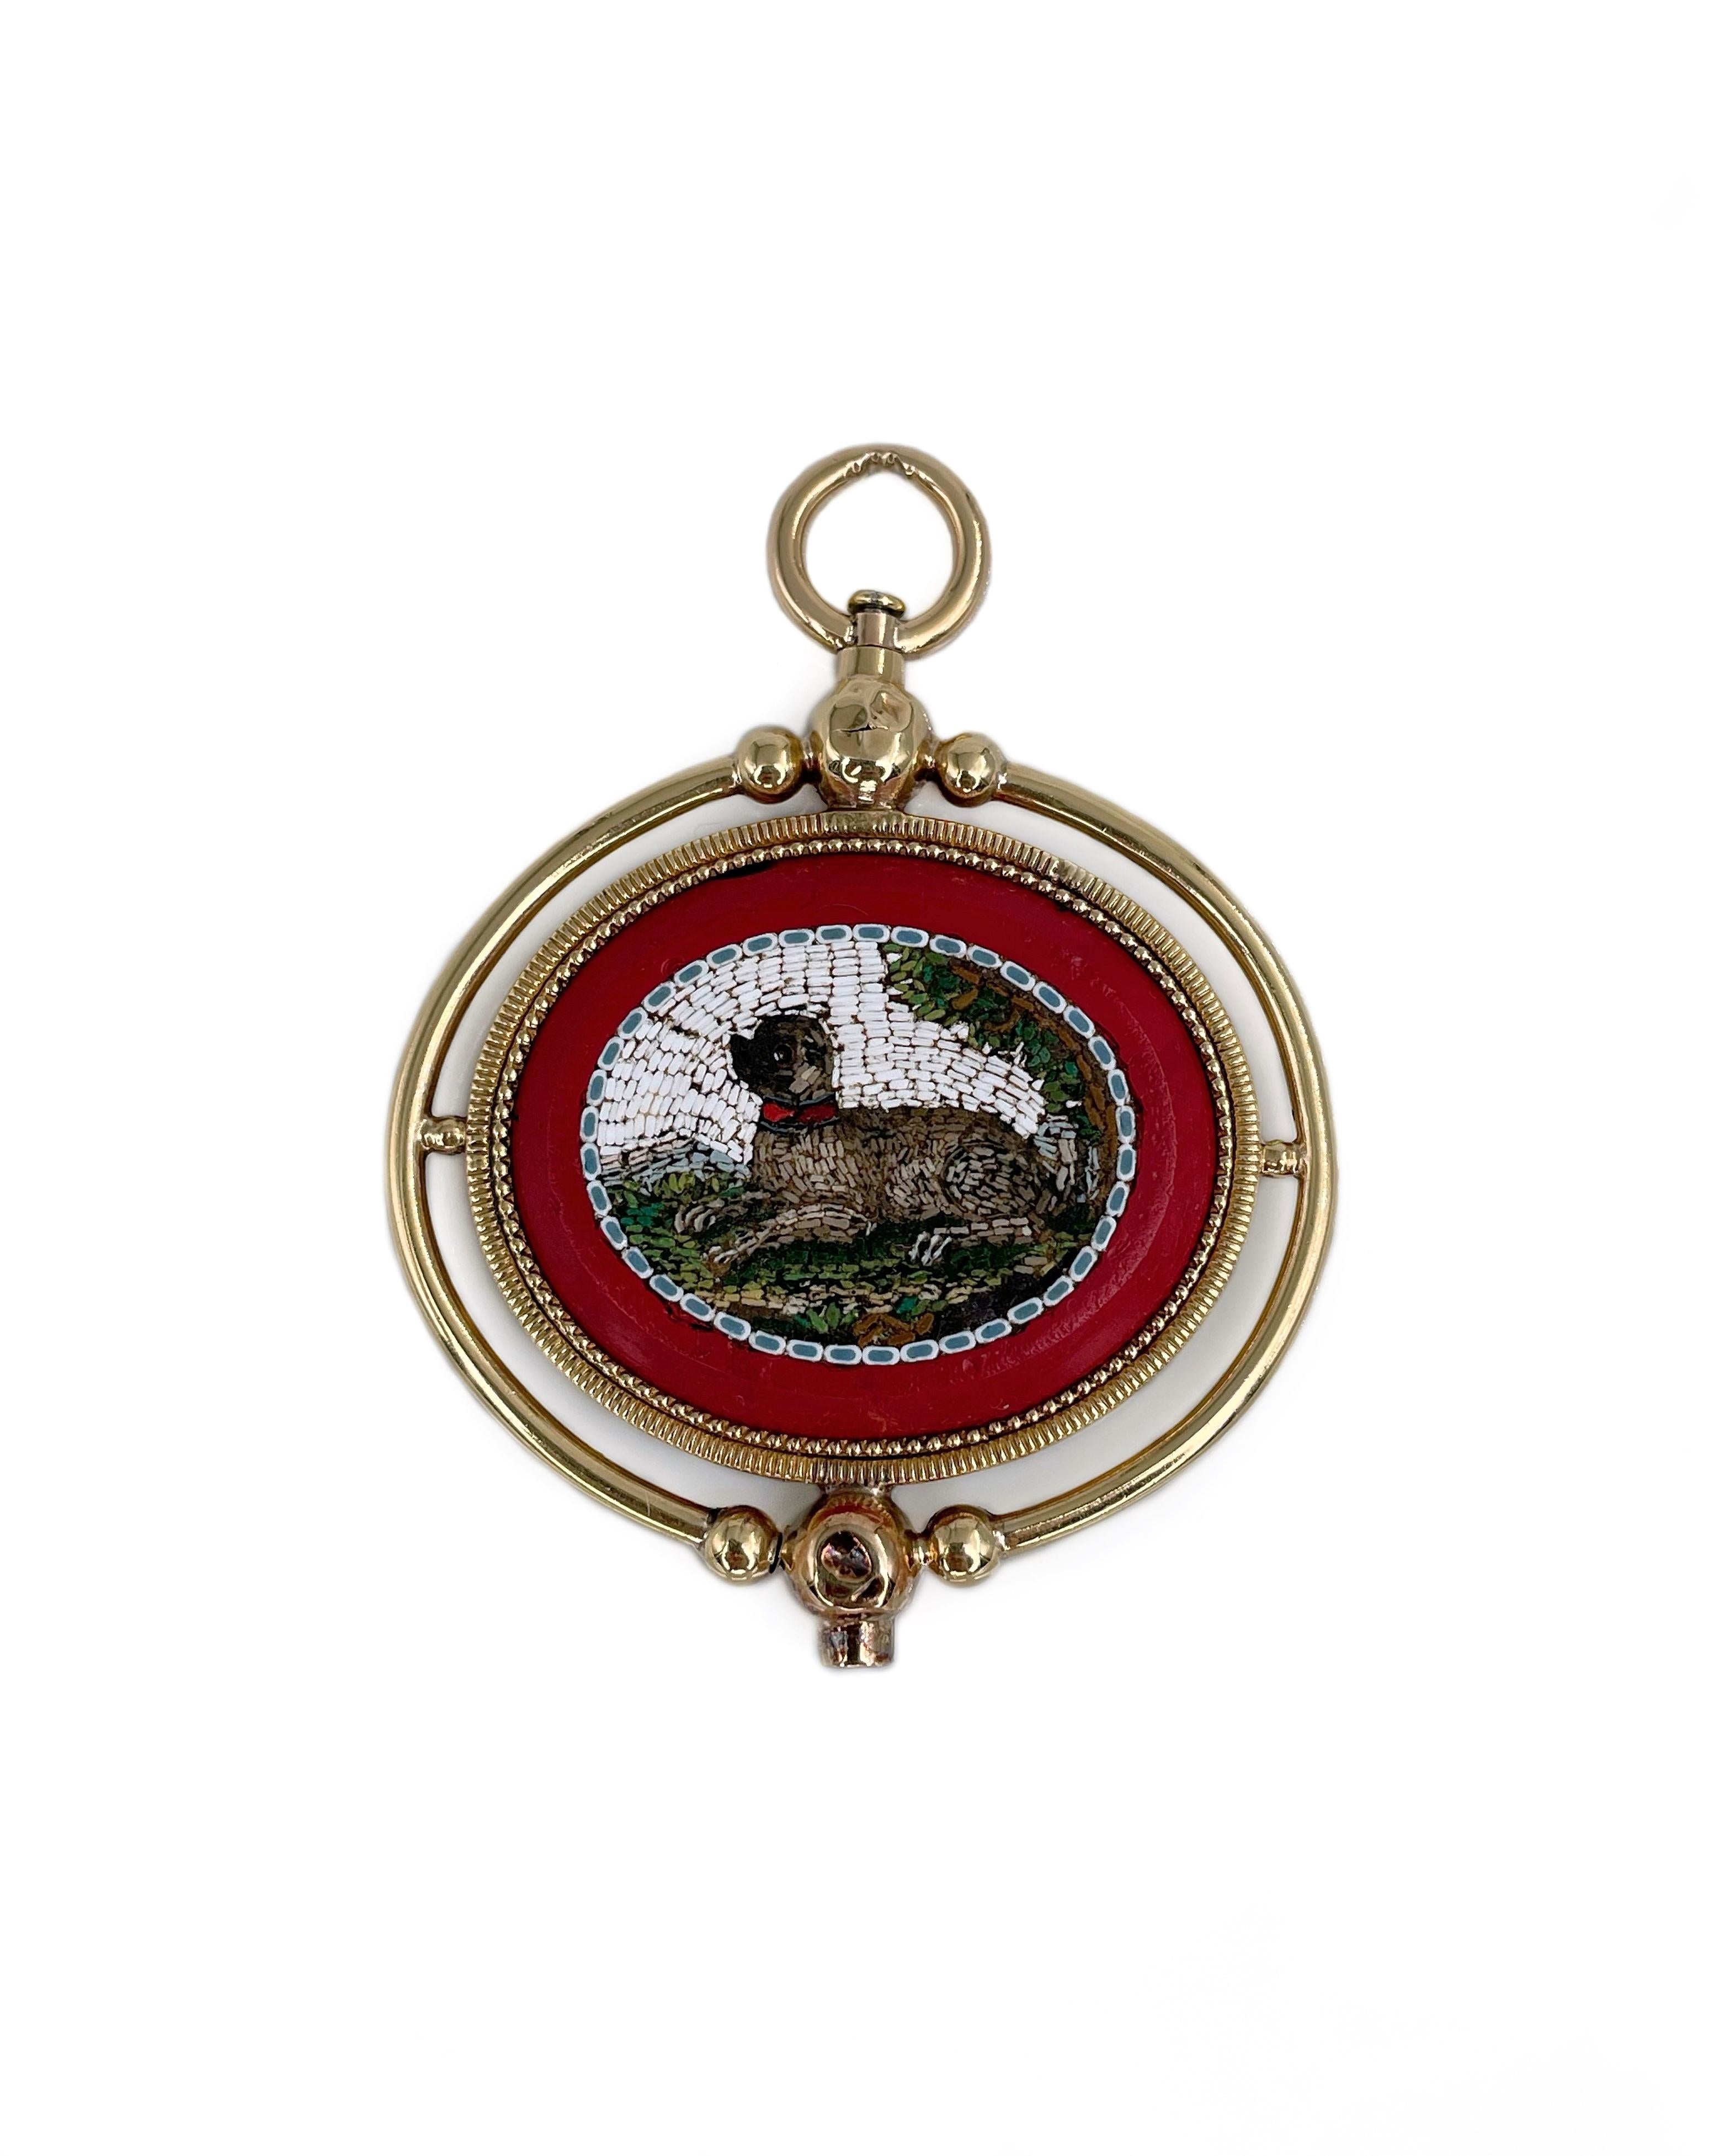 It is a lovely Victorian pocket watch key fob charm pendant crafted in 18K gold. Circa 1880. It features the detailed fauna micro mosaics on both sides. One is depicting two birds, another - a dog. 

Weight: 18.25g
Size: 5.5x4.2cm

———

If you have